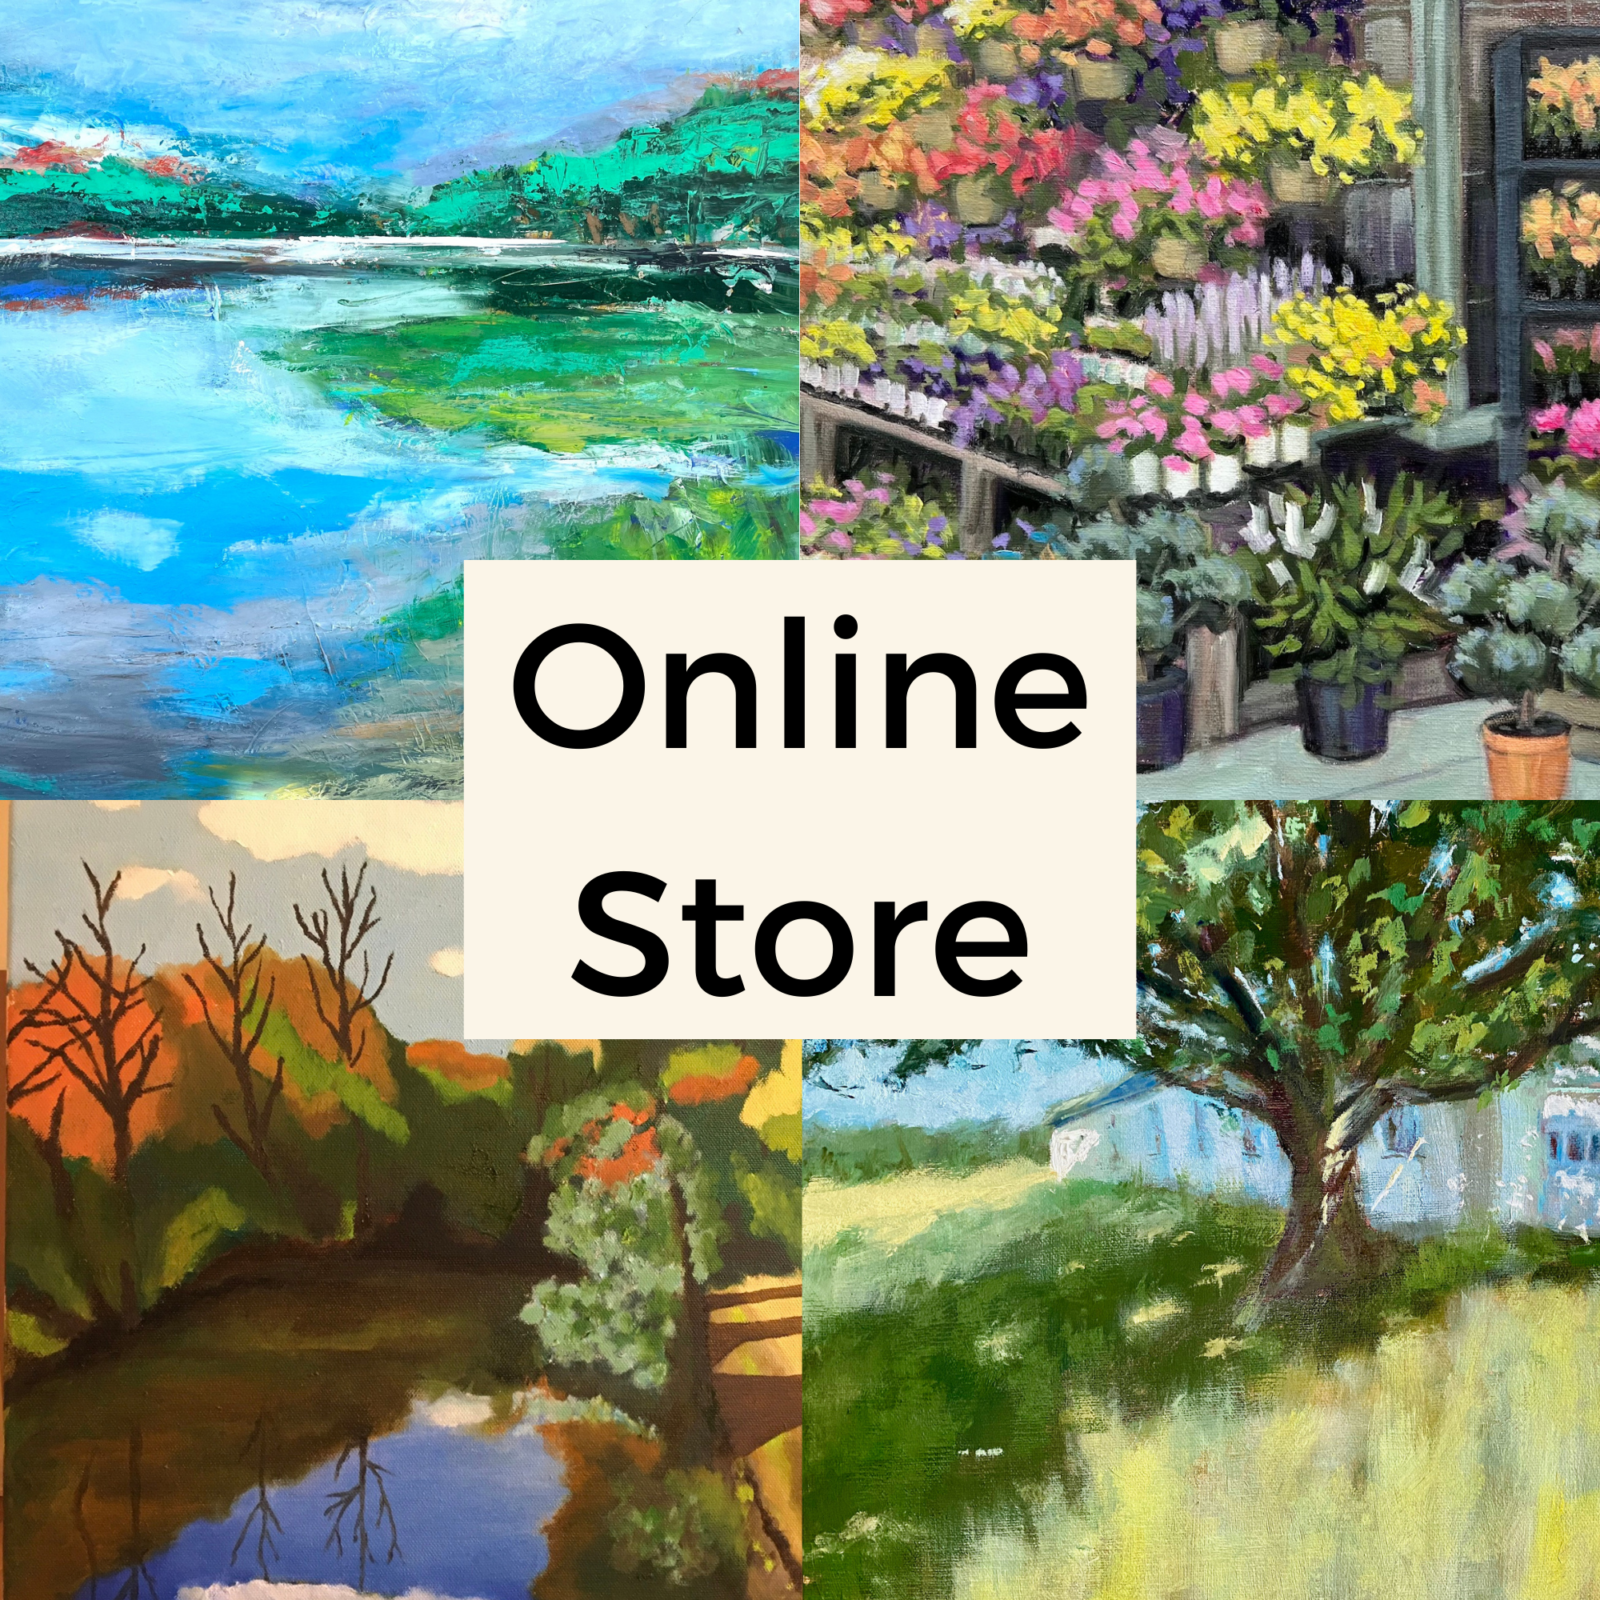 Four images of artwork representing our store